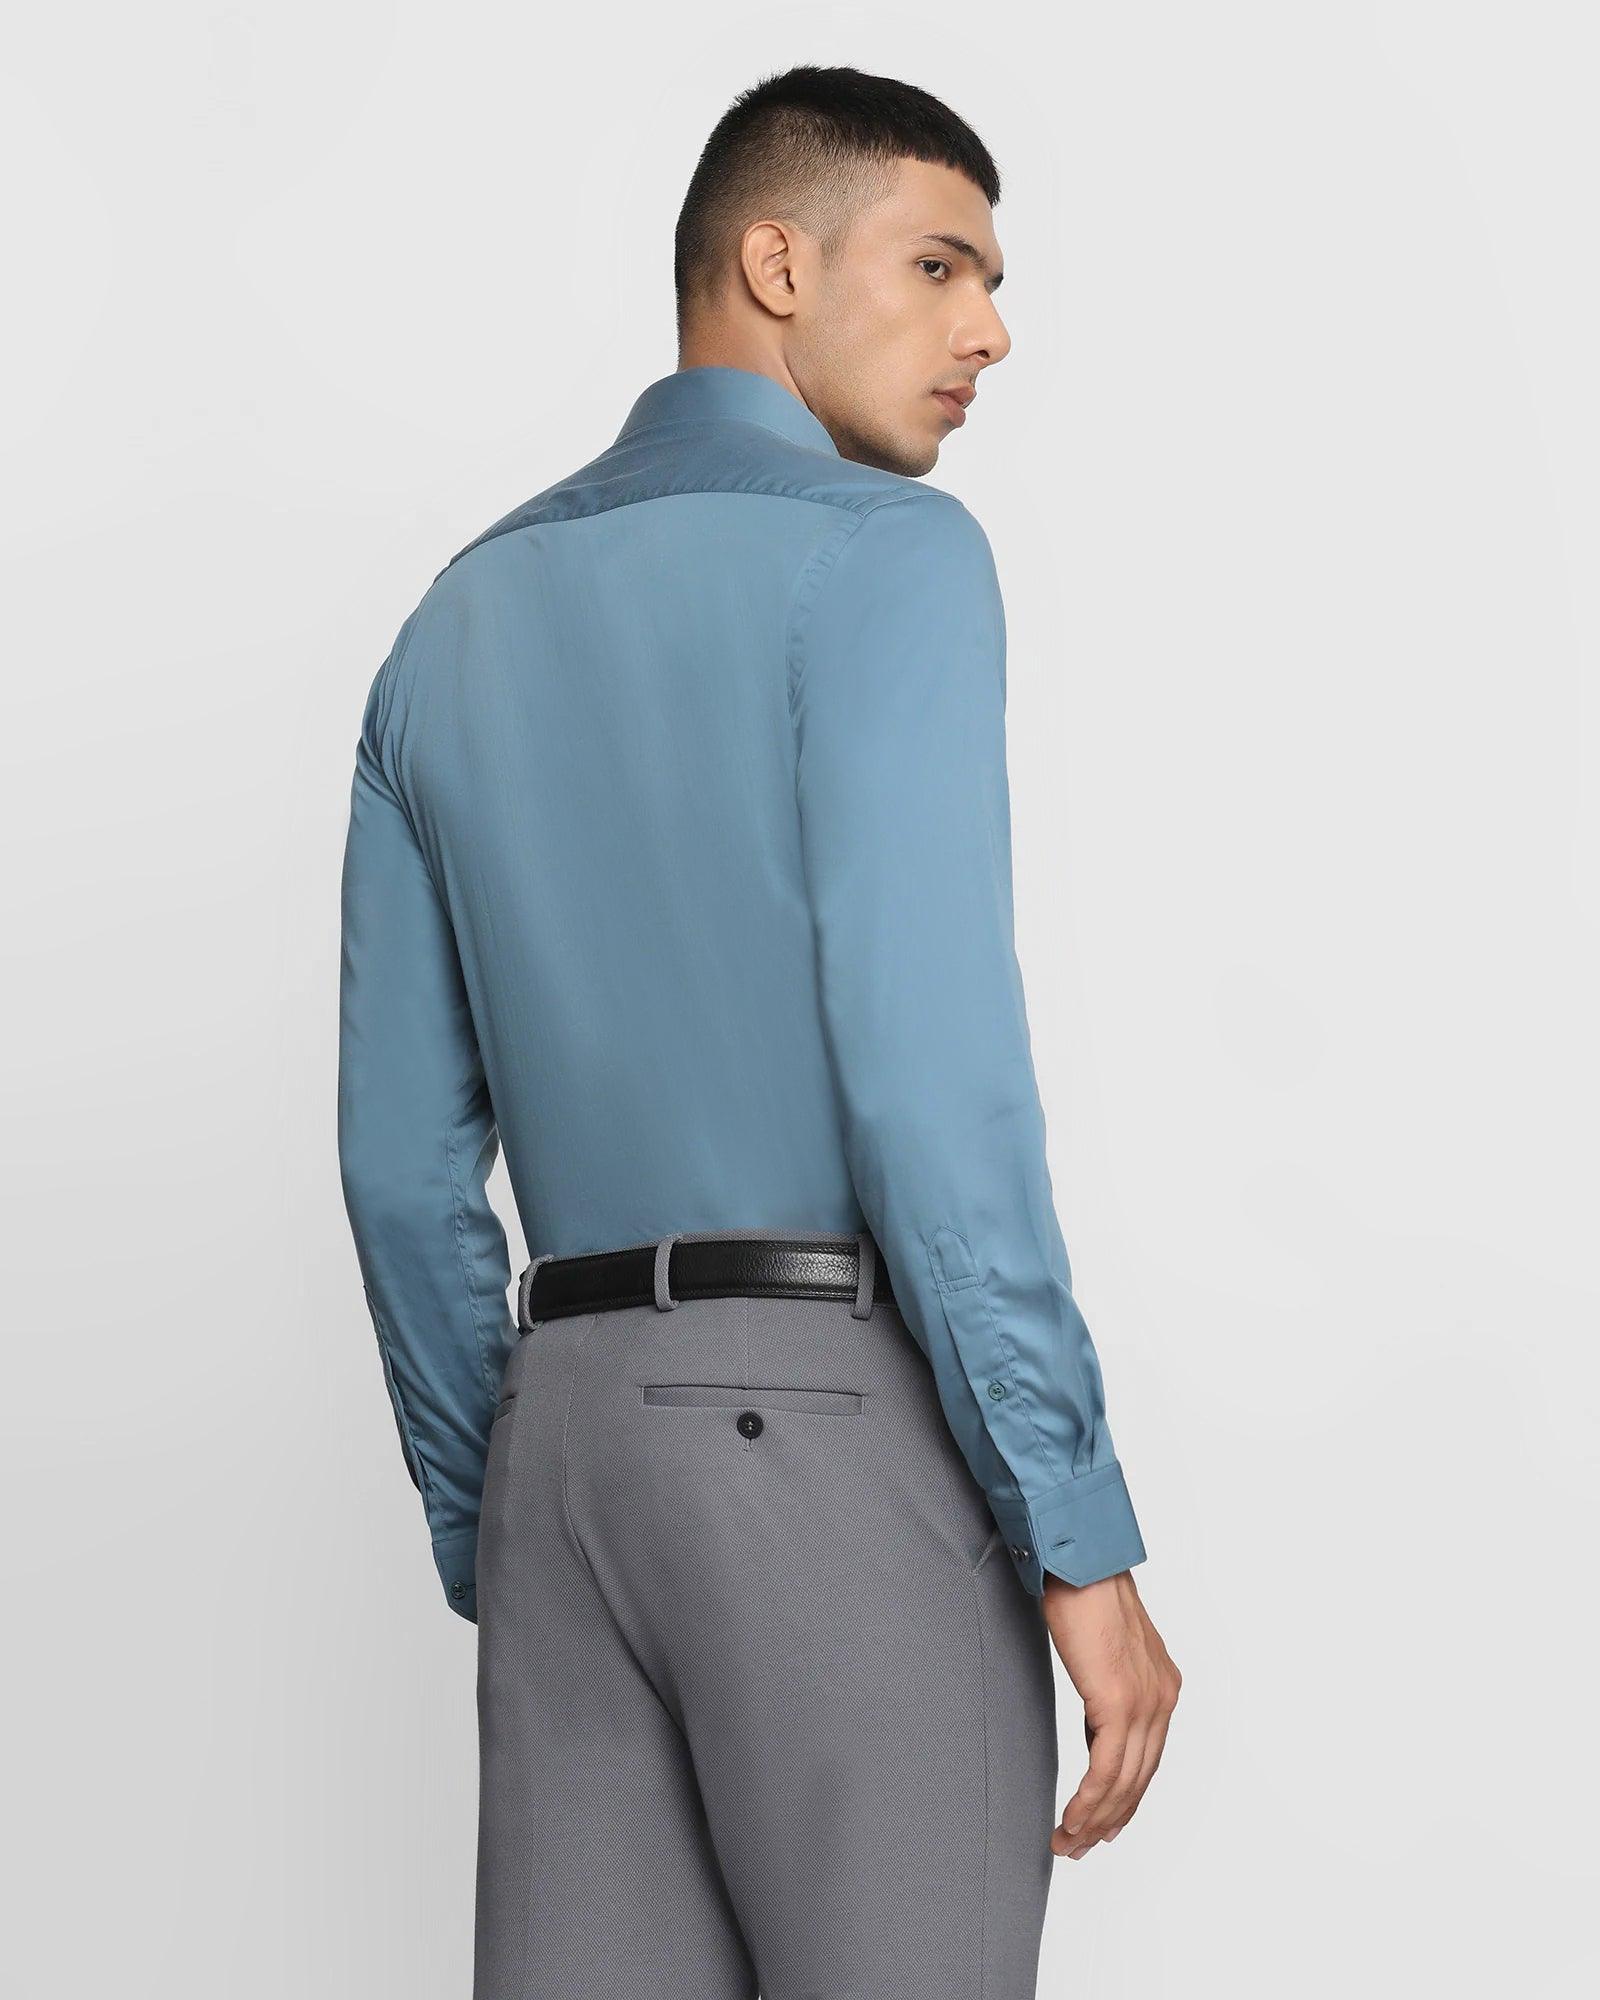 TechPro Formal Teal Solid Shirt - Neil